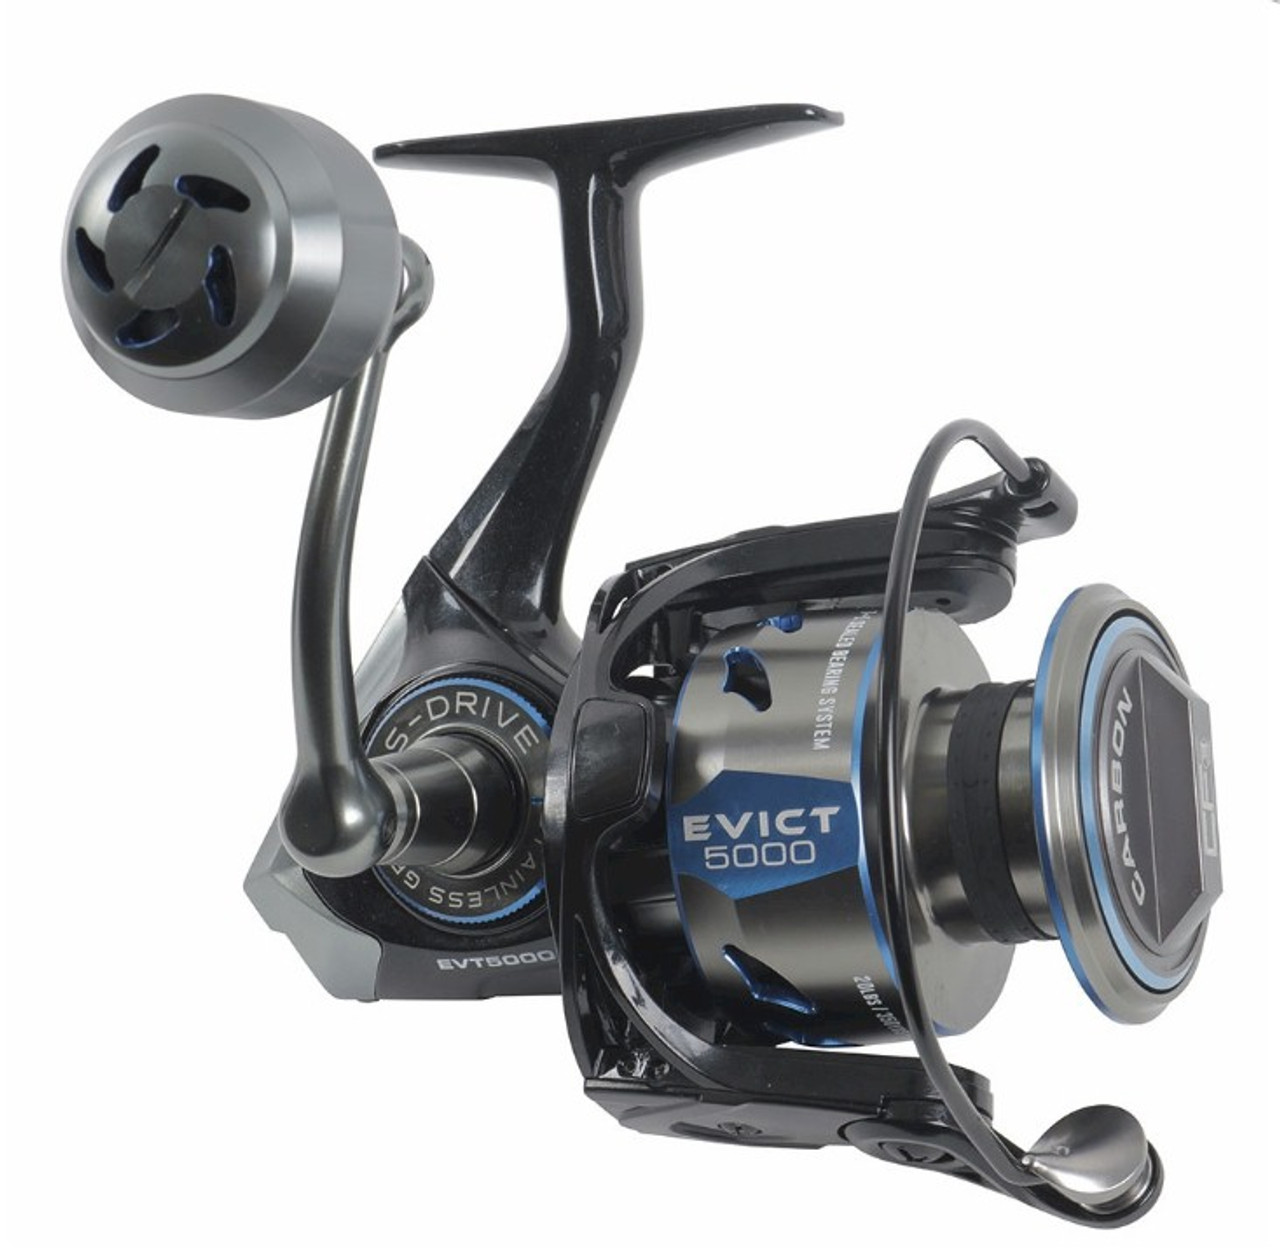 Tsunami Evict Spinning Reel 5000 from